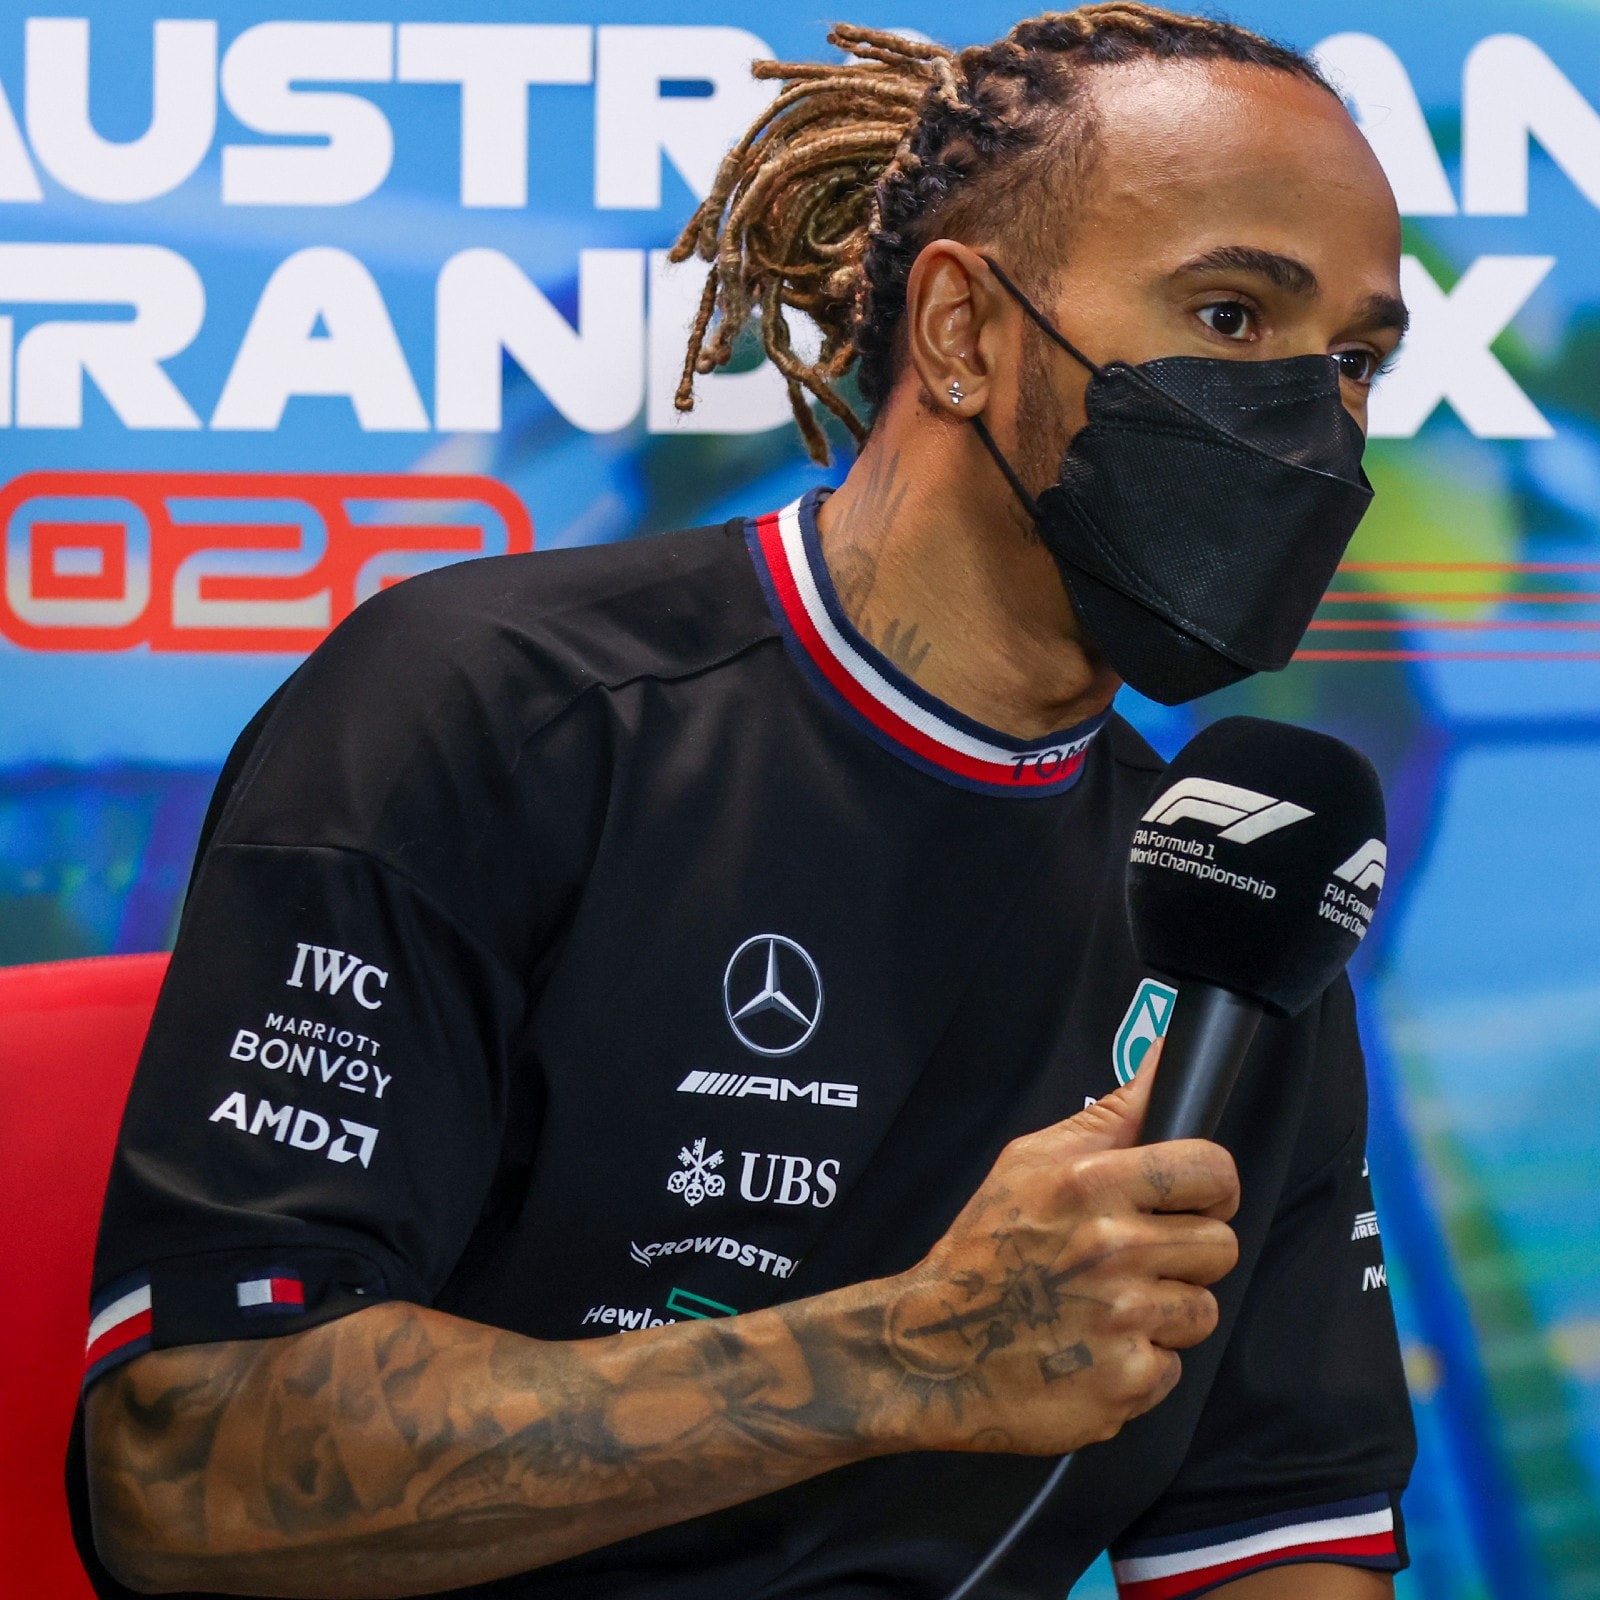 Lewis Hamilton on Collision Course with F1 Chiefs Over 'Bling' Ban